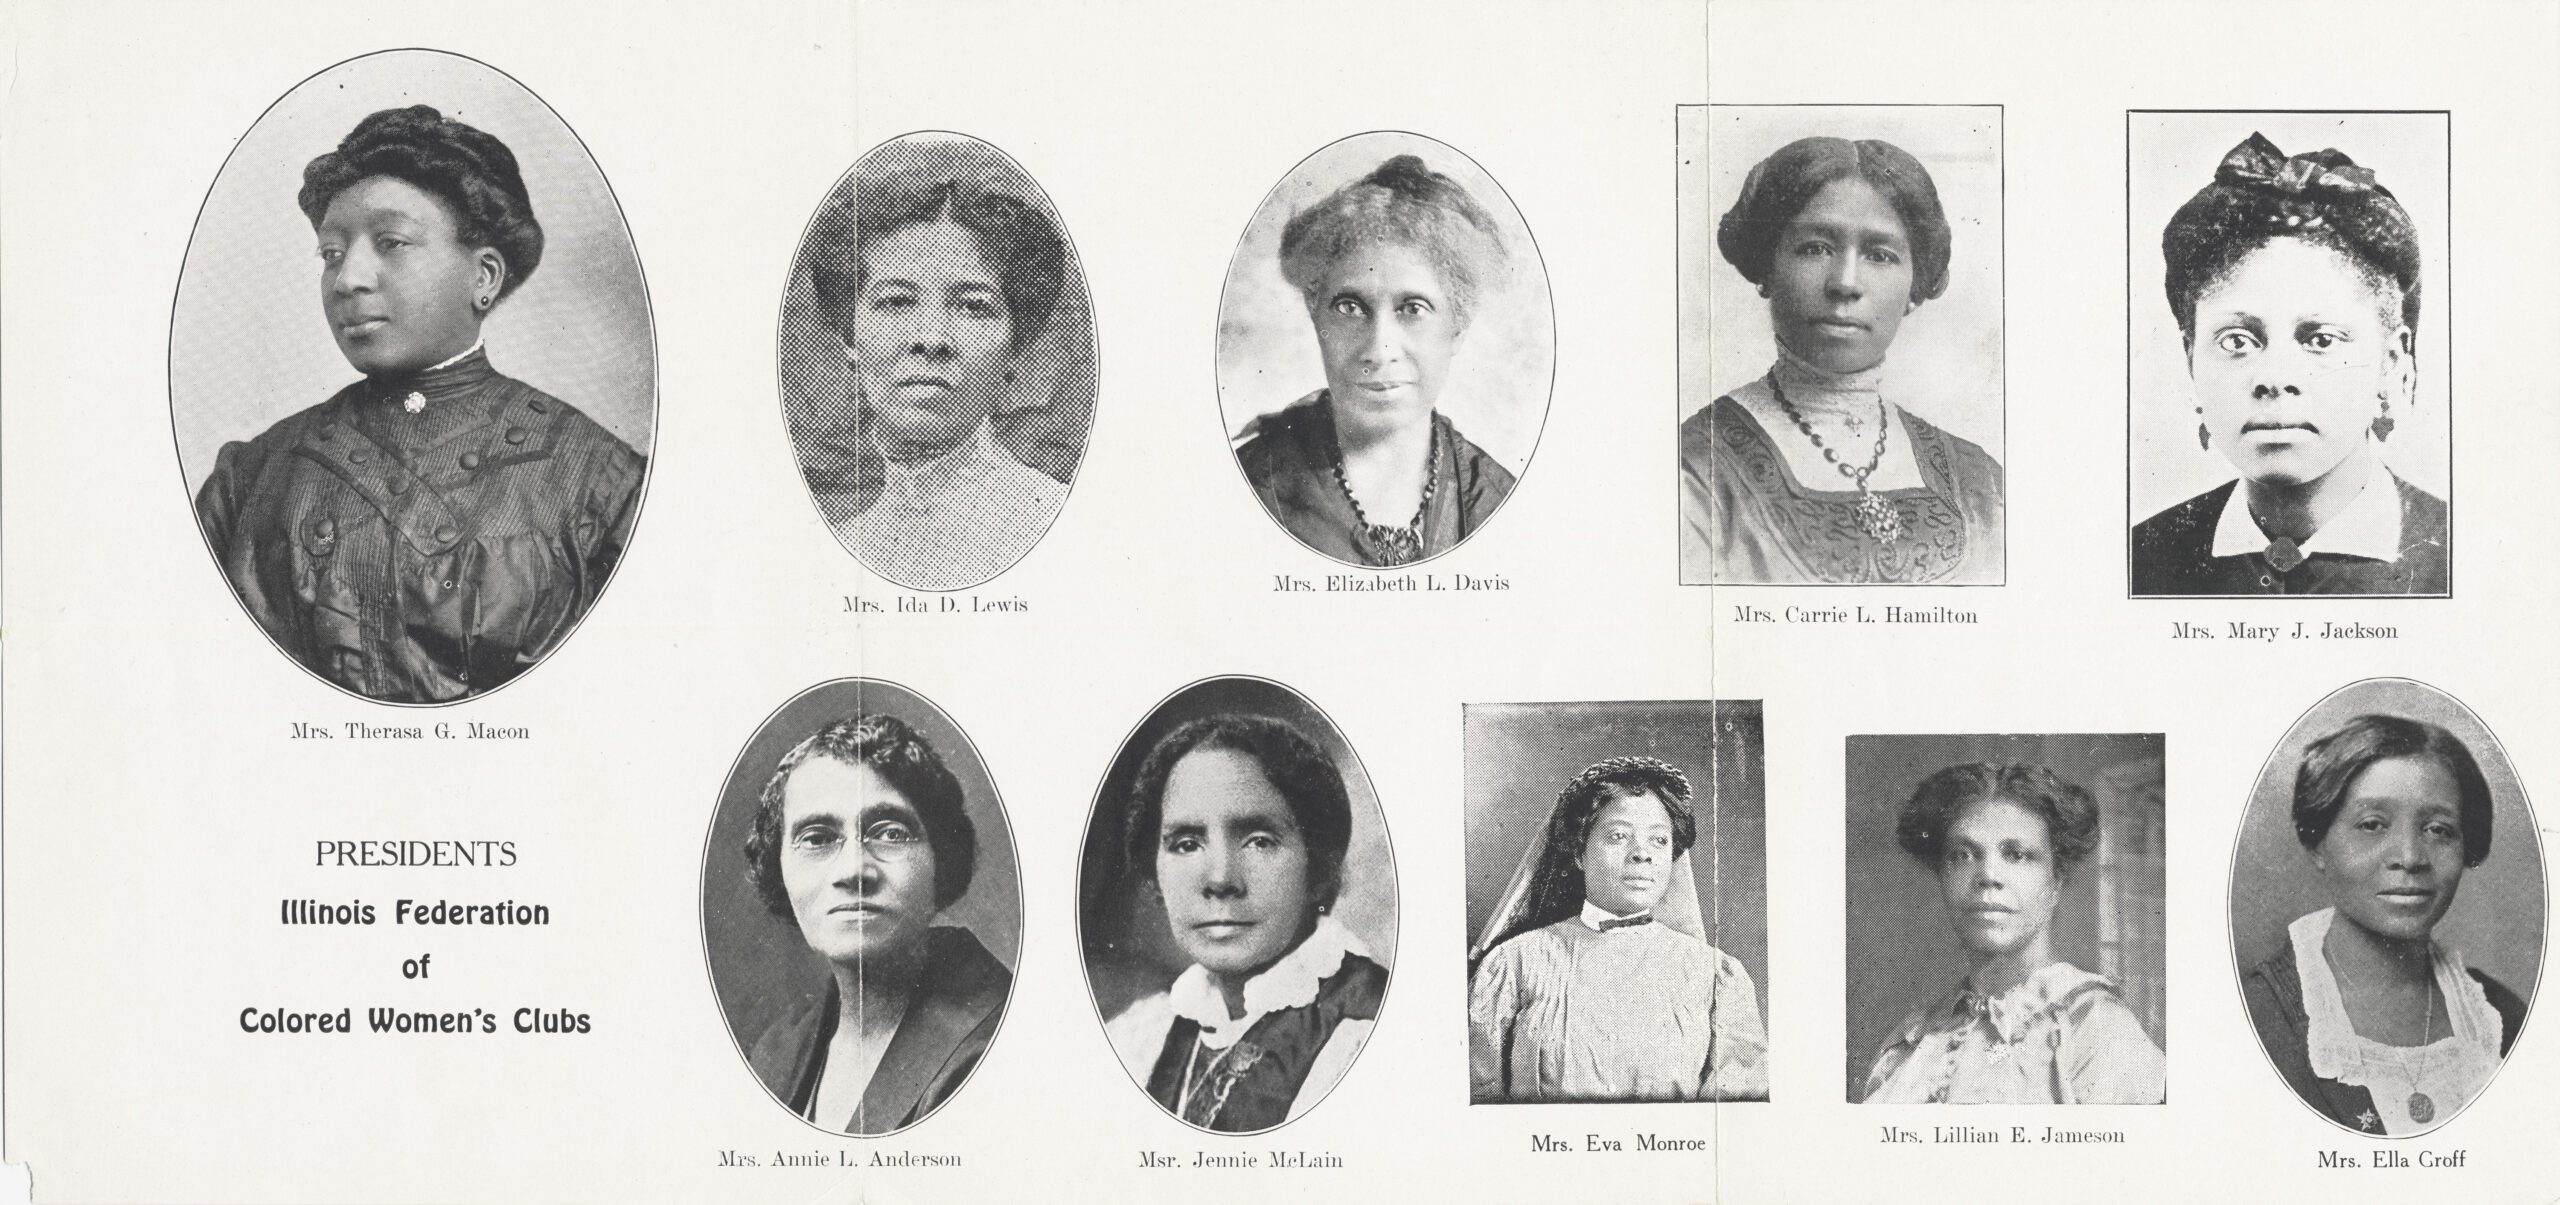 Presidents of the Illinois Federation of Colored Women’s Clubs